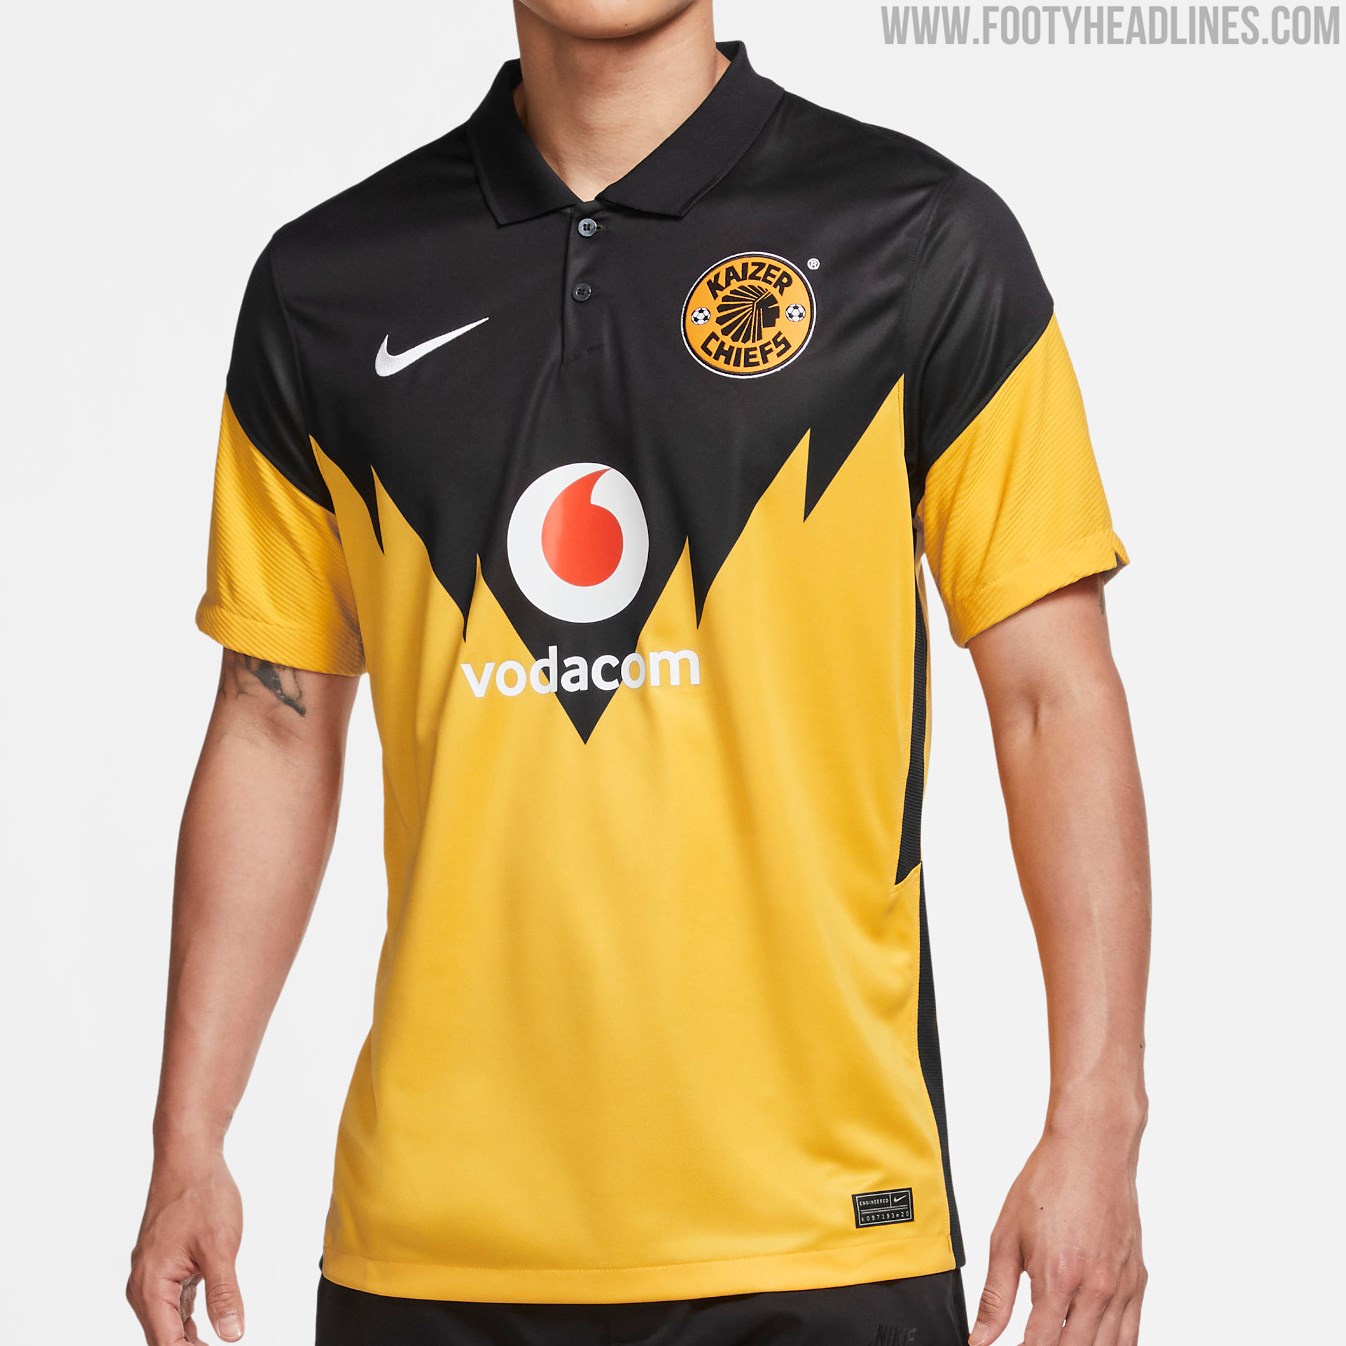 Nike Launch Kaizer Chiefs 20/21 Home and Away Jerseys - SoccerBible